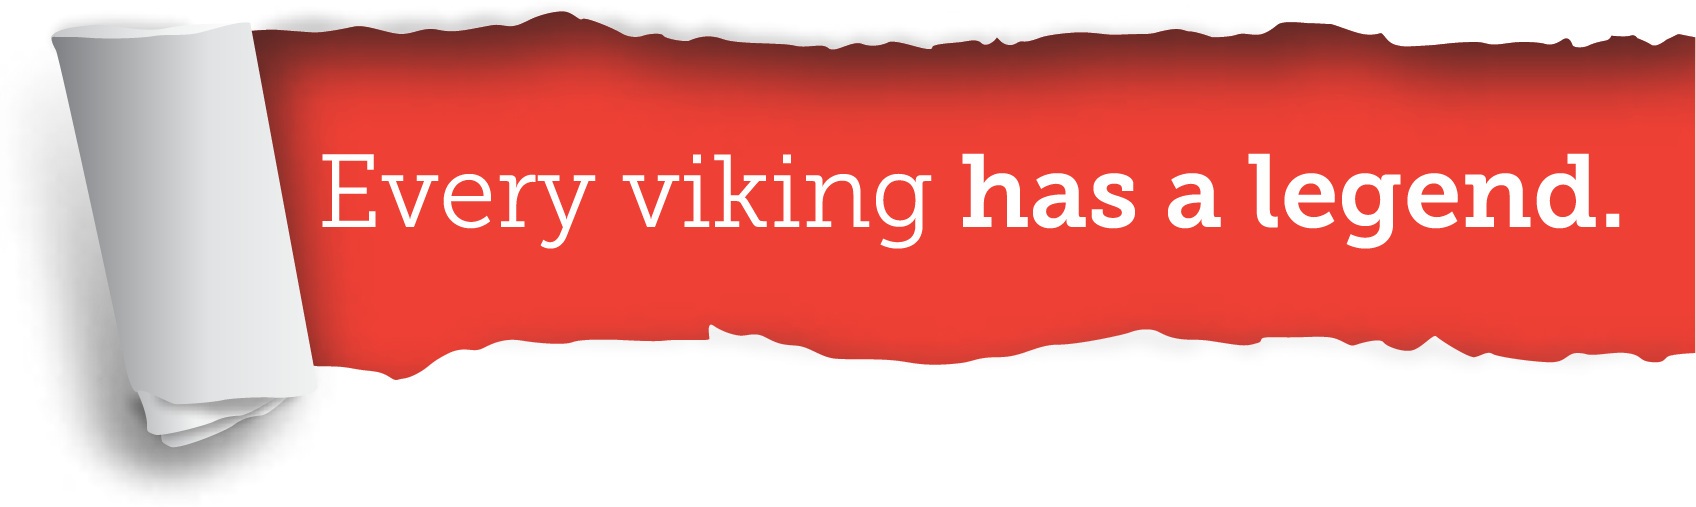 Every Viking Had a Legend Banner